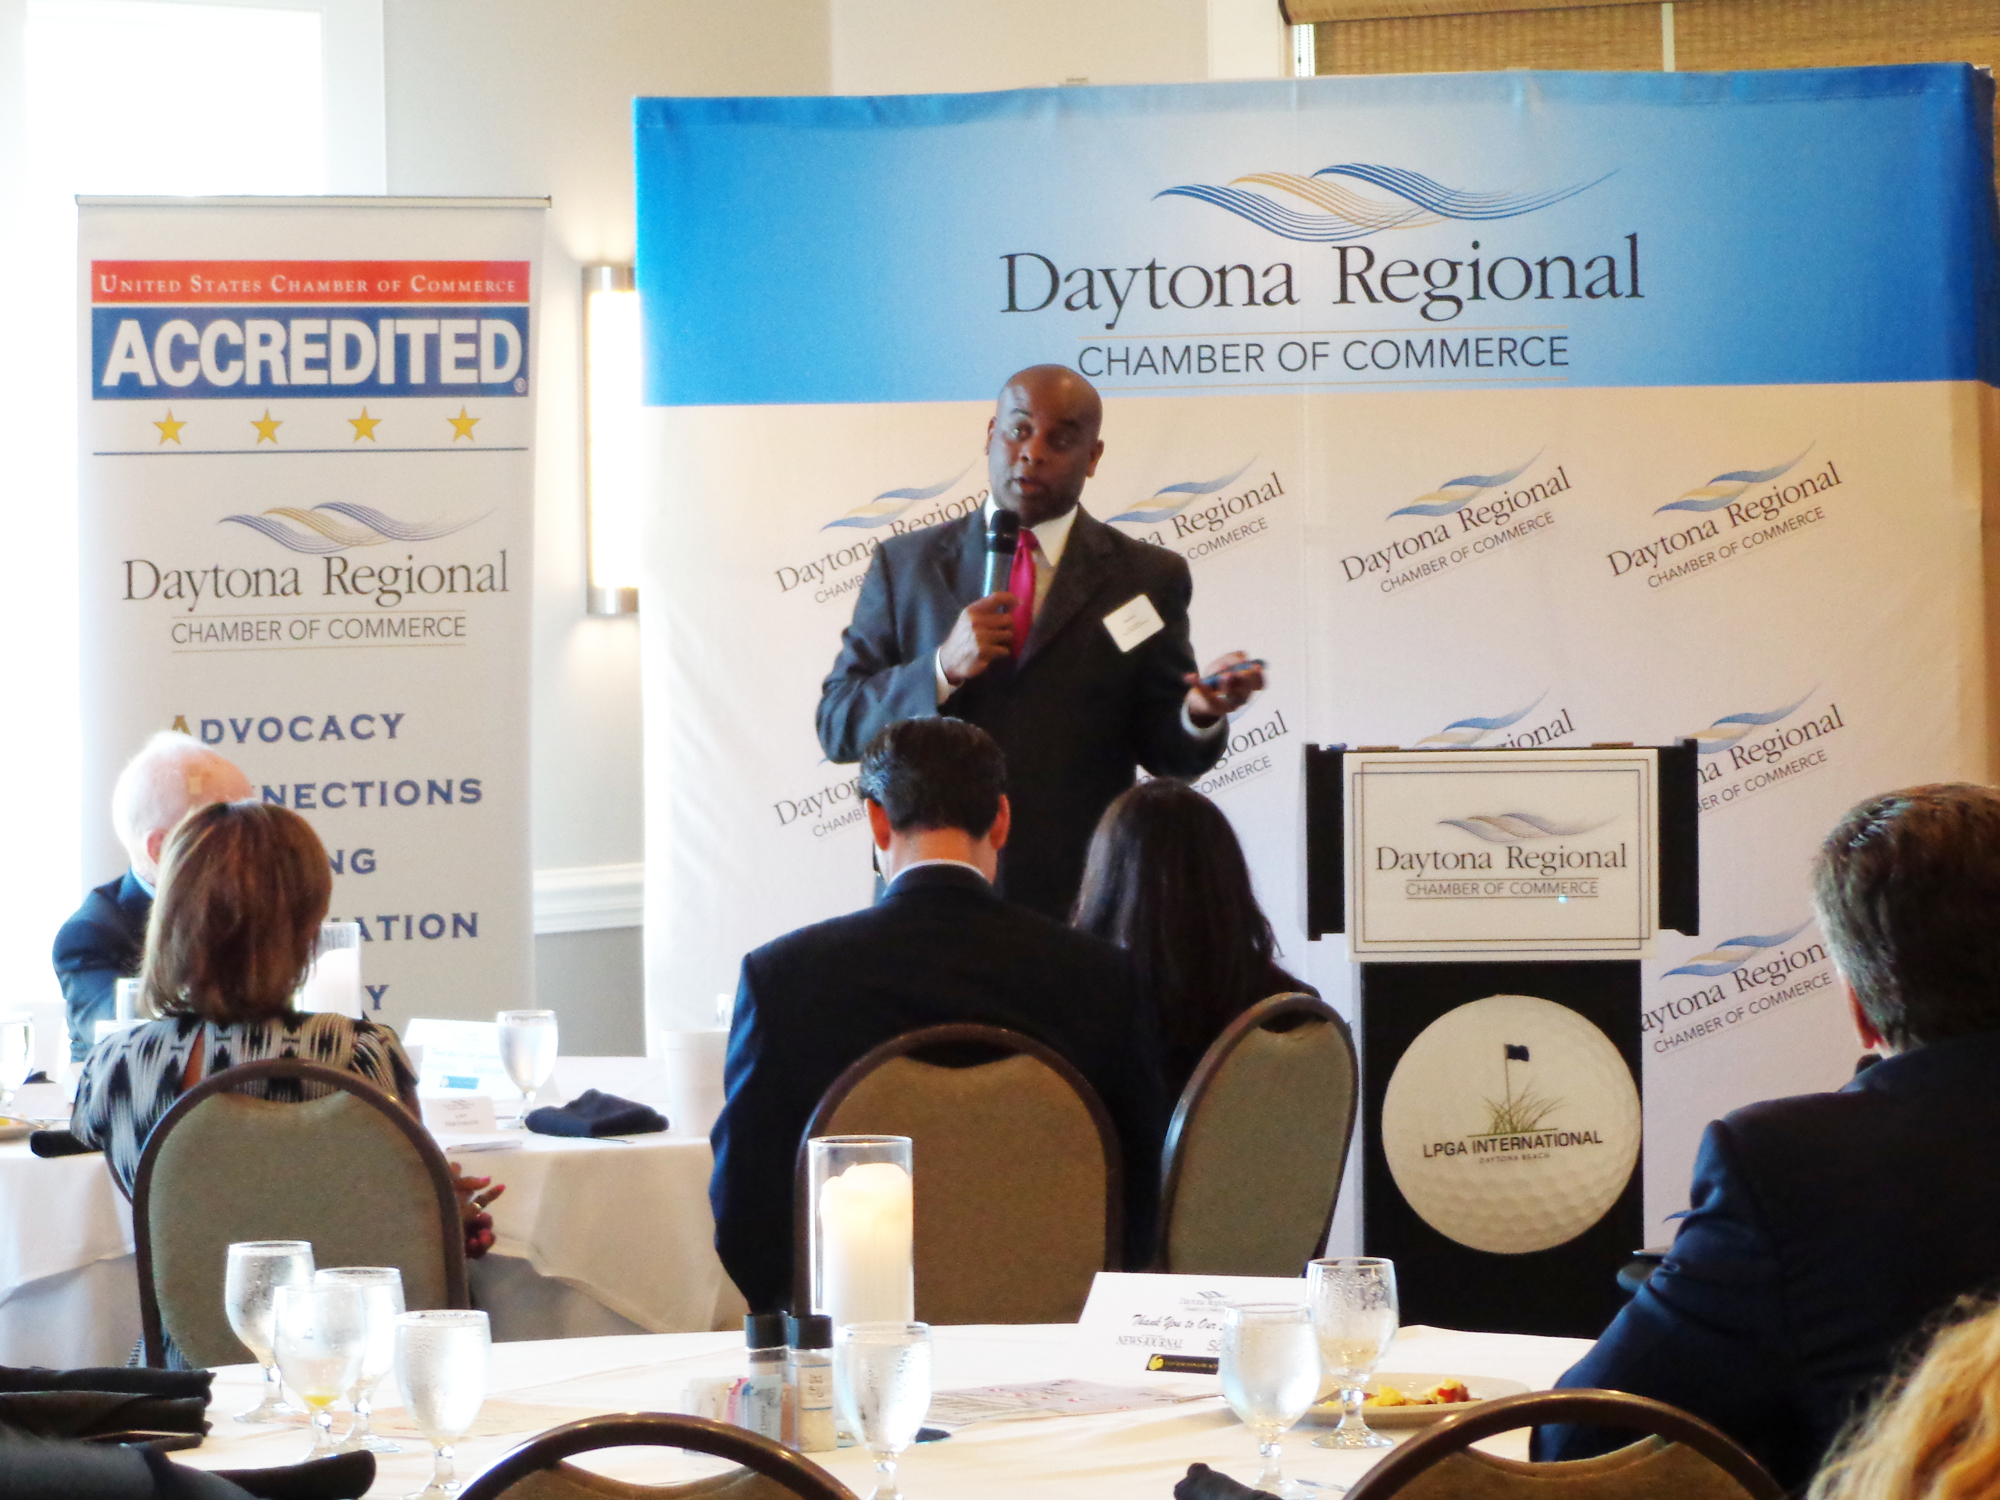 Daytona Beach Mayor Derrick Henry presented an update on the First Step Shelter during the Eggs and Issues program by the Daytona Regional Chamber of Commerce on Thursday, Oct. 10. Photo courtesy of Kim Hover